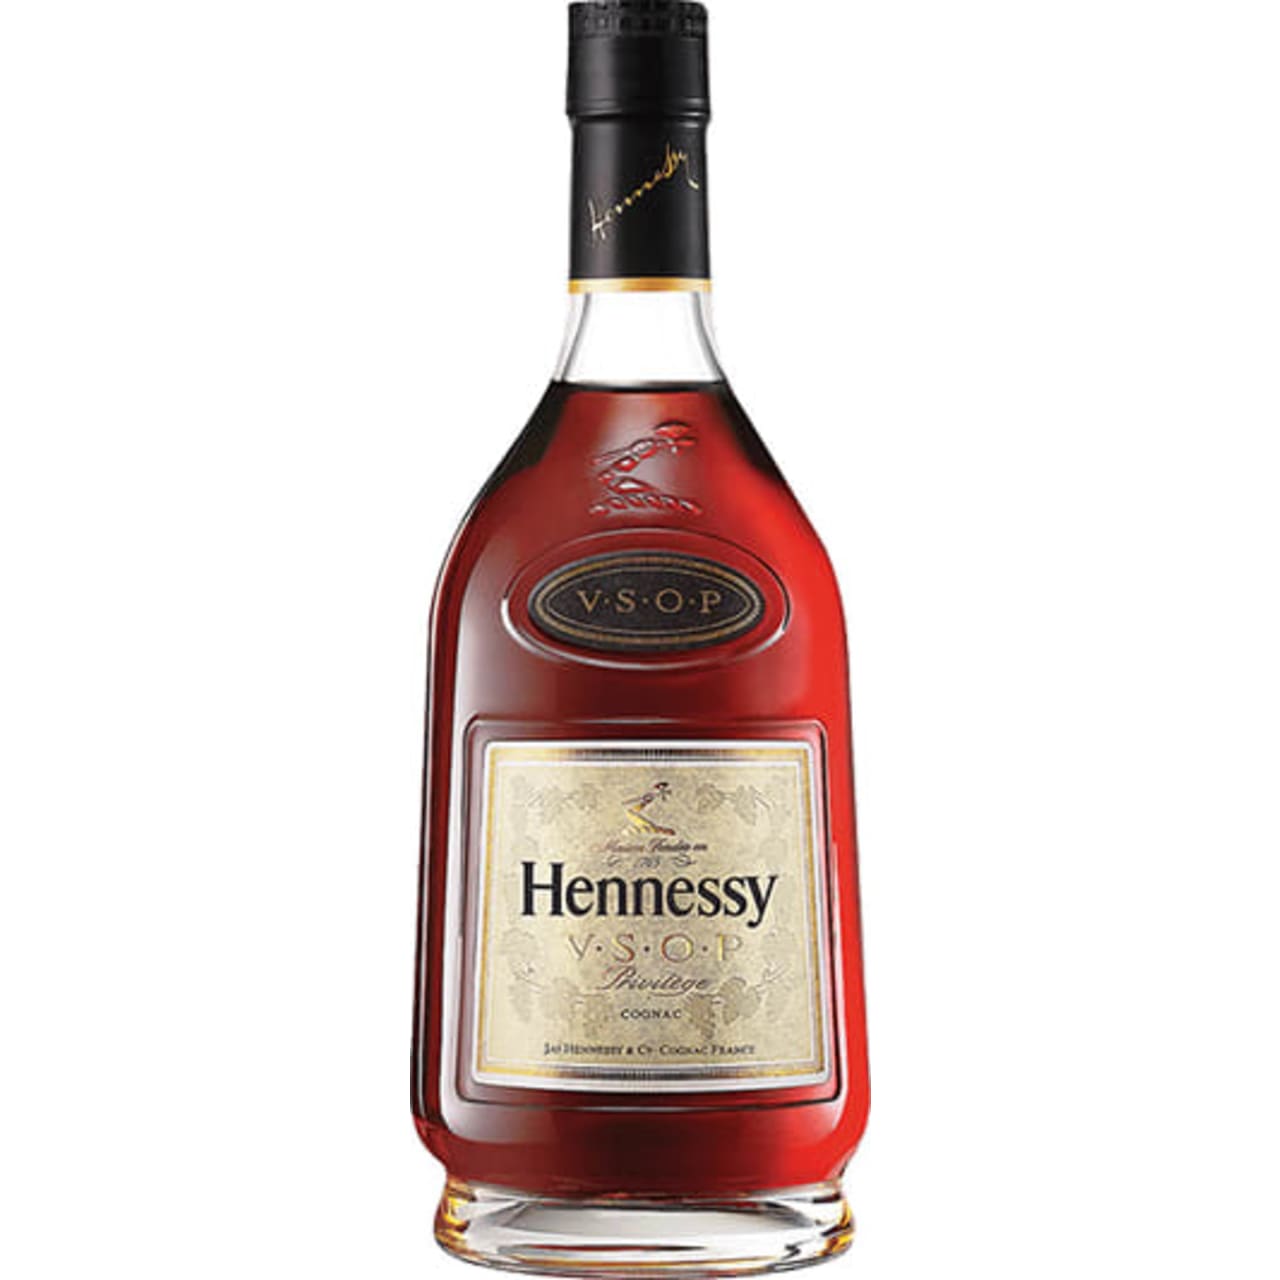 Hennessy VSOP comprises a gradual blend of over 60 eaux-de-vie aged up to 15 years old. Taken from the four leading vineyards in the Cognac region, VSOP is slowly matured in old barrels.